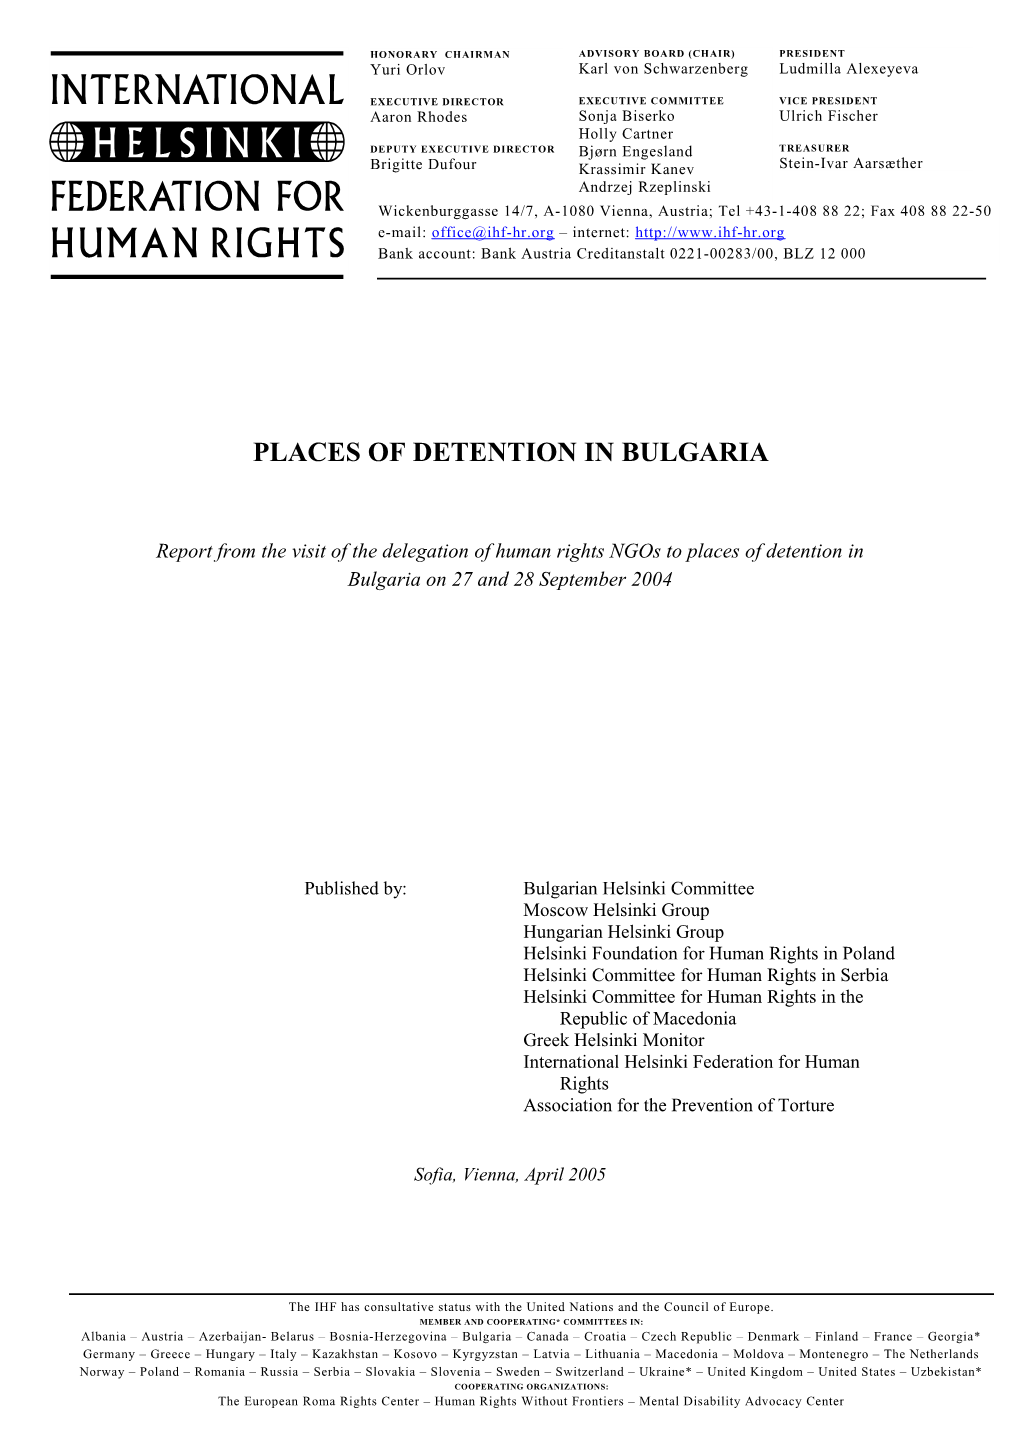 Places of Detention in Bulgaria